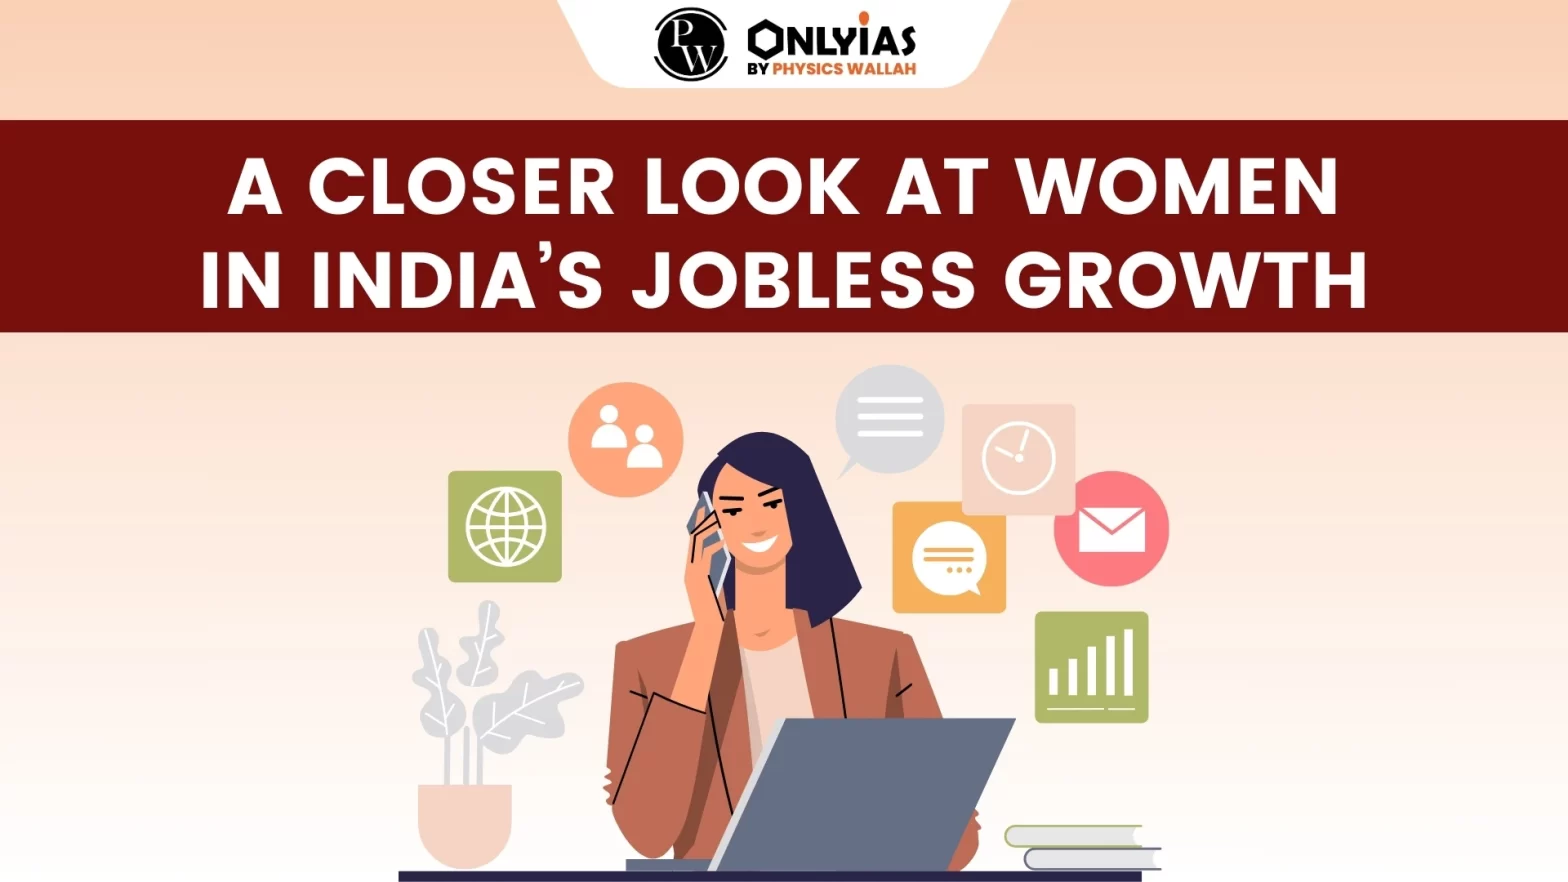 A Closer Look at Women in India’s Jobless Growth